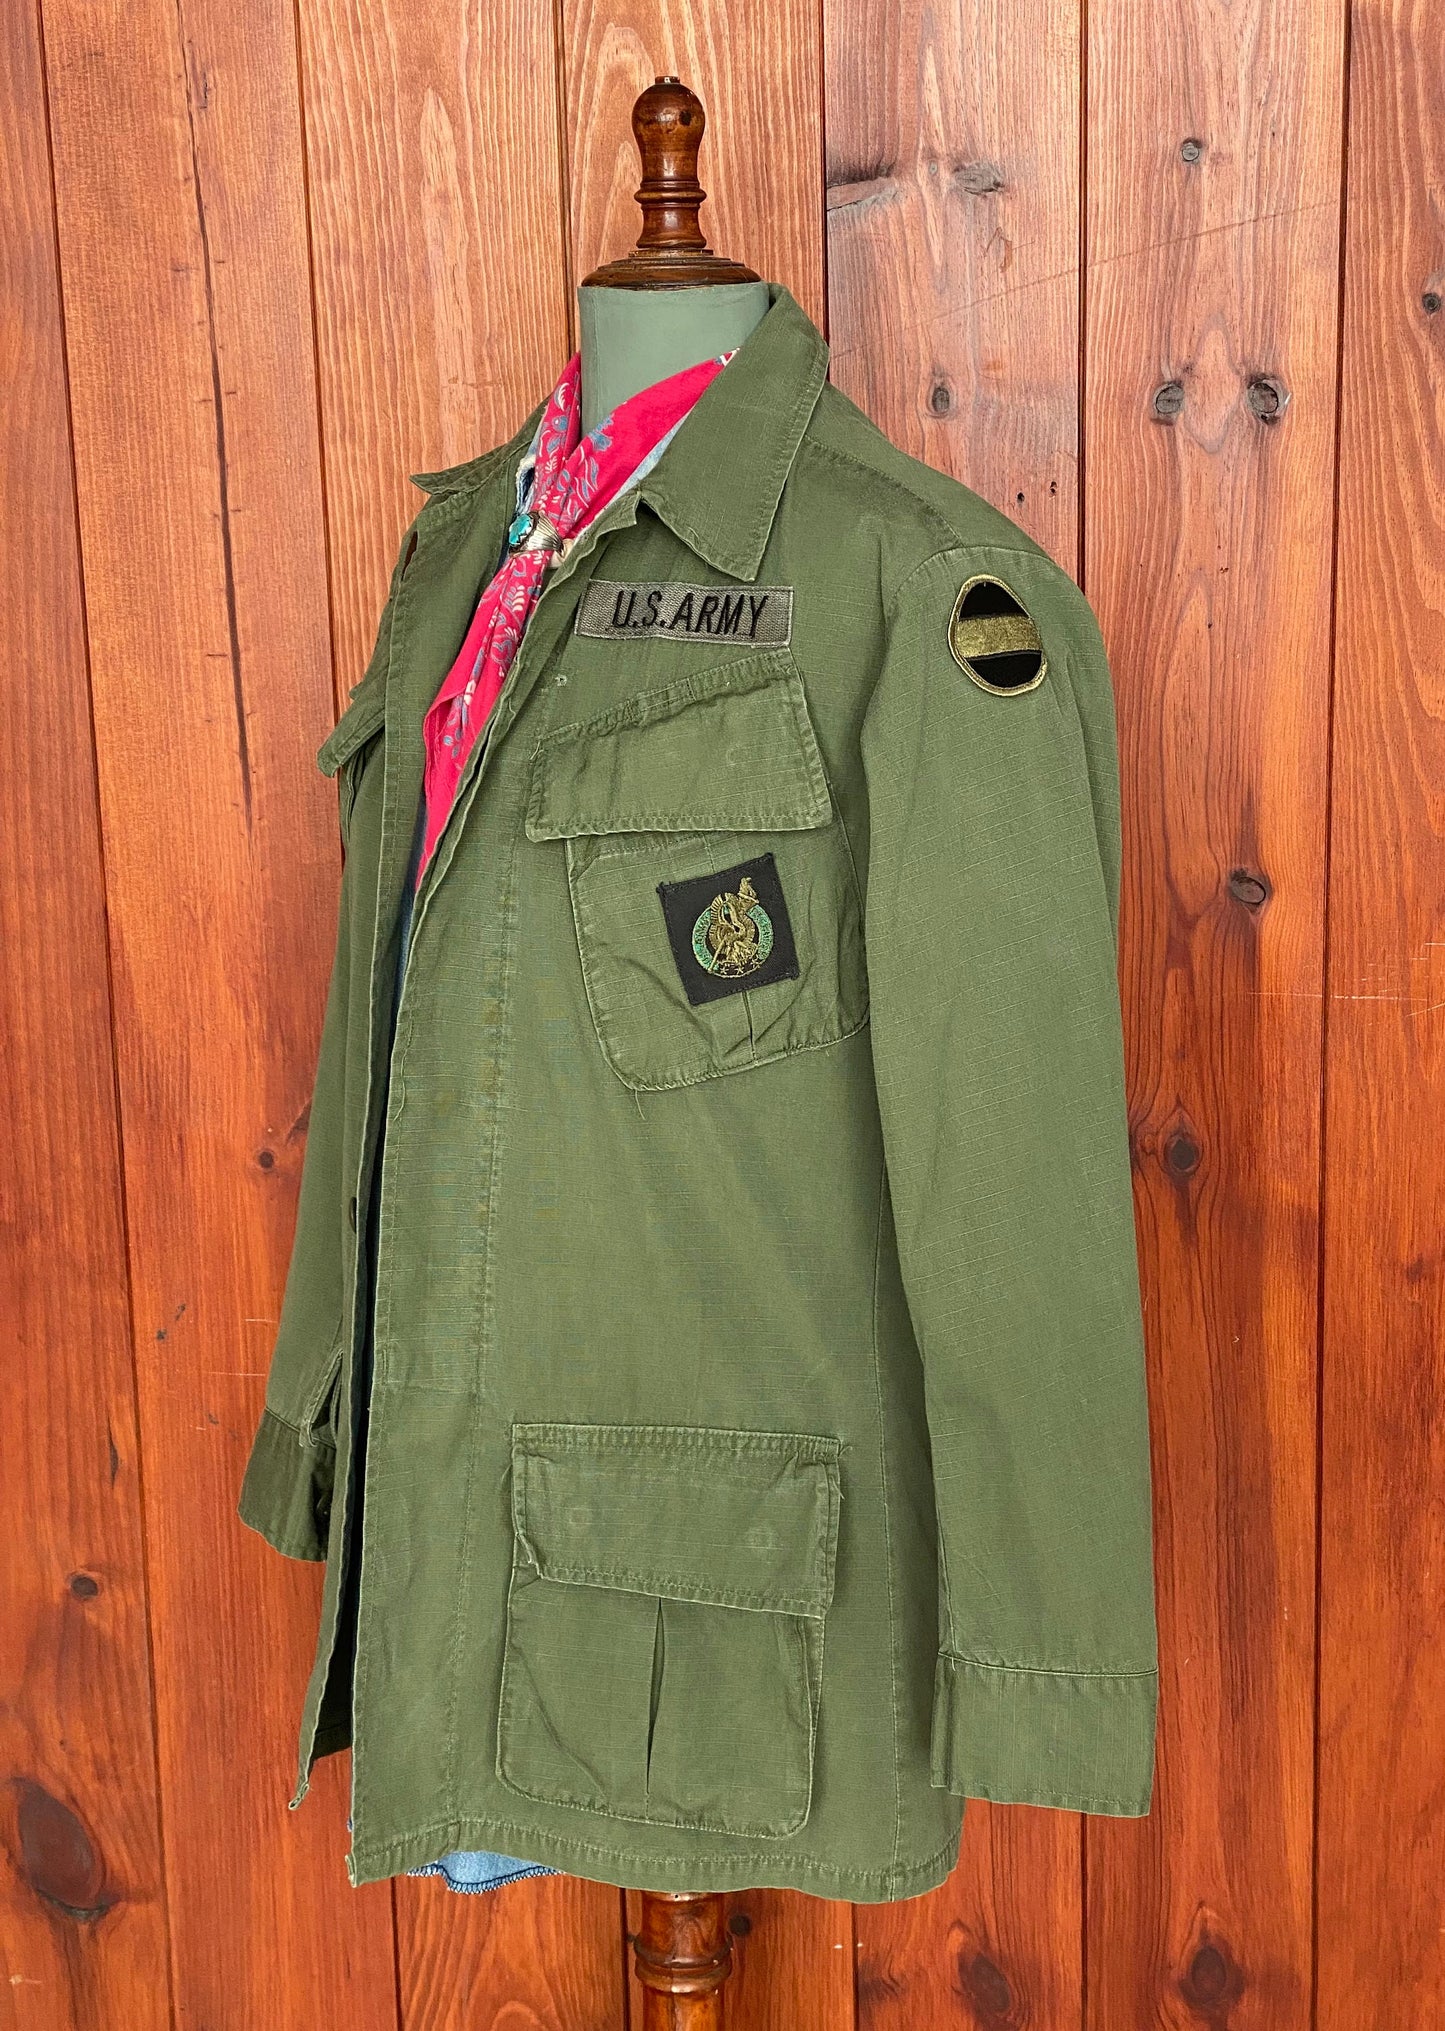 X Small. Authentic 1970 US Army Vintage tropical Vietnam  jungle jacket.